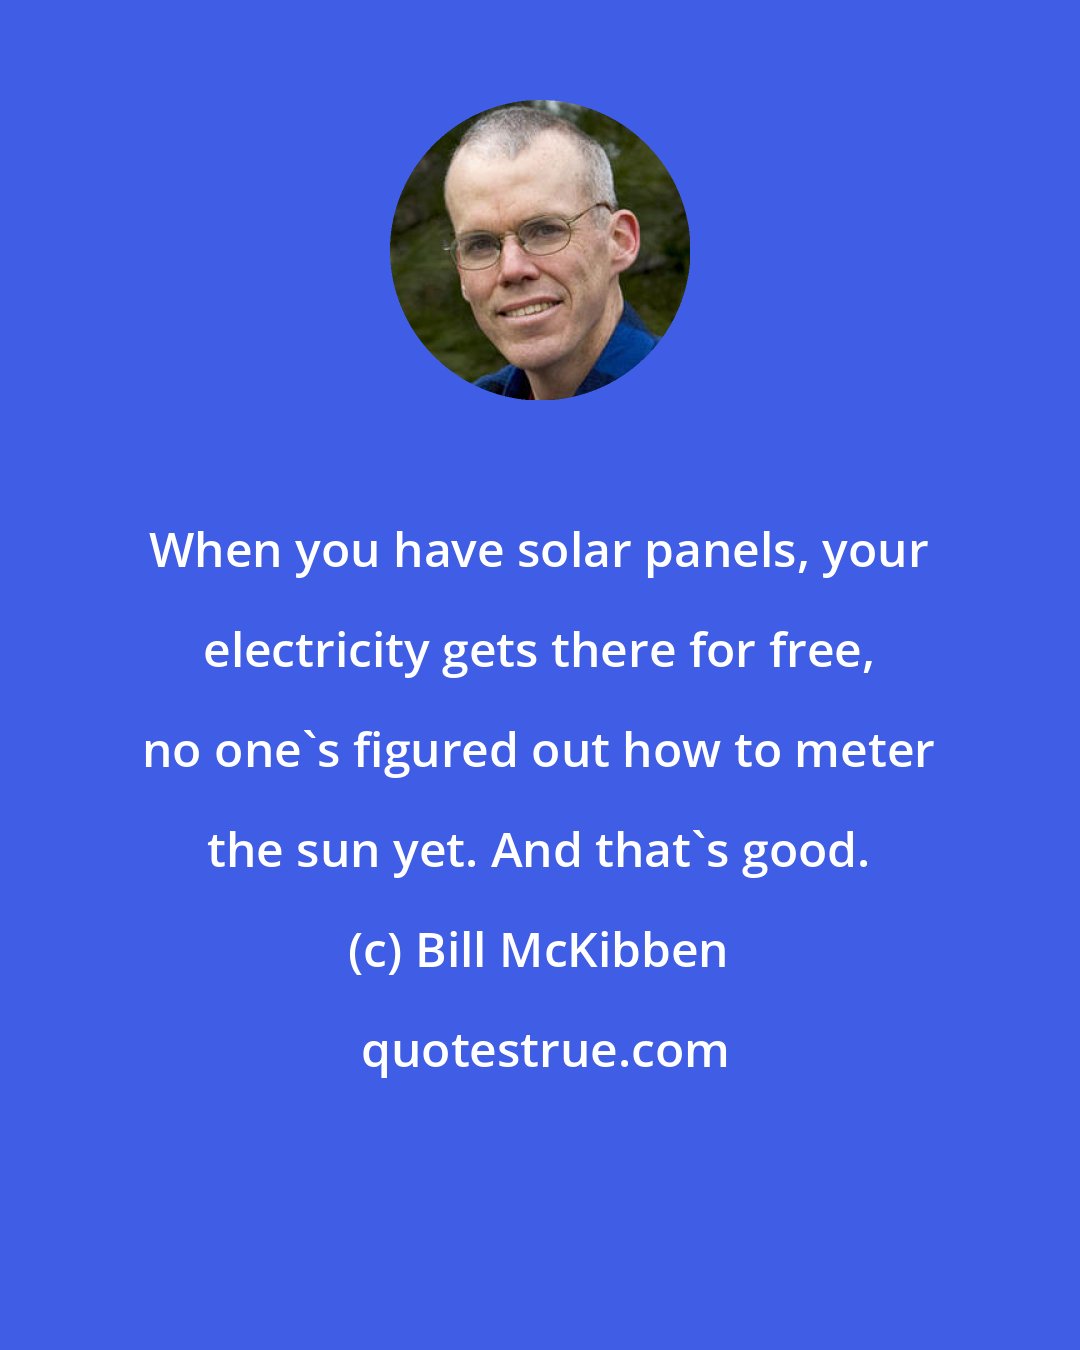 Bill McKibben: When you have solar panels, your electricity gets there for free, no one's figured out how to meter the sun yet. And that's good.